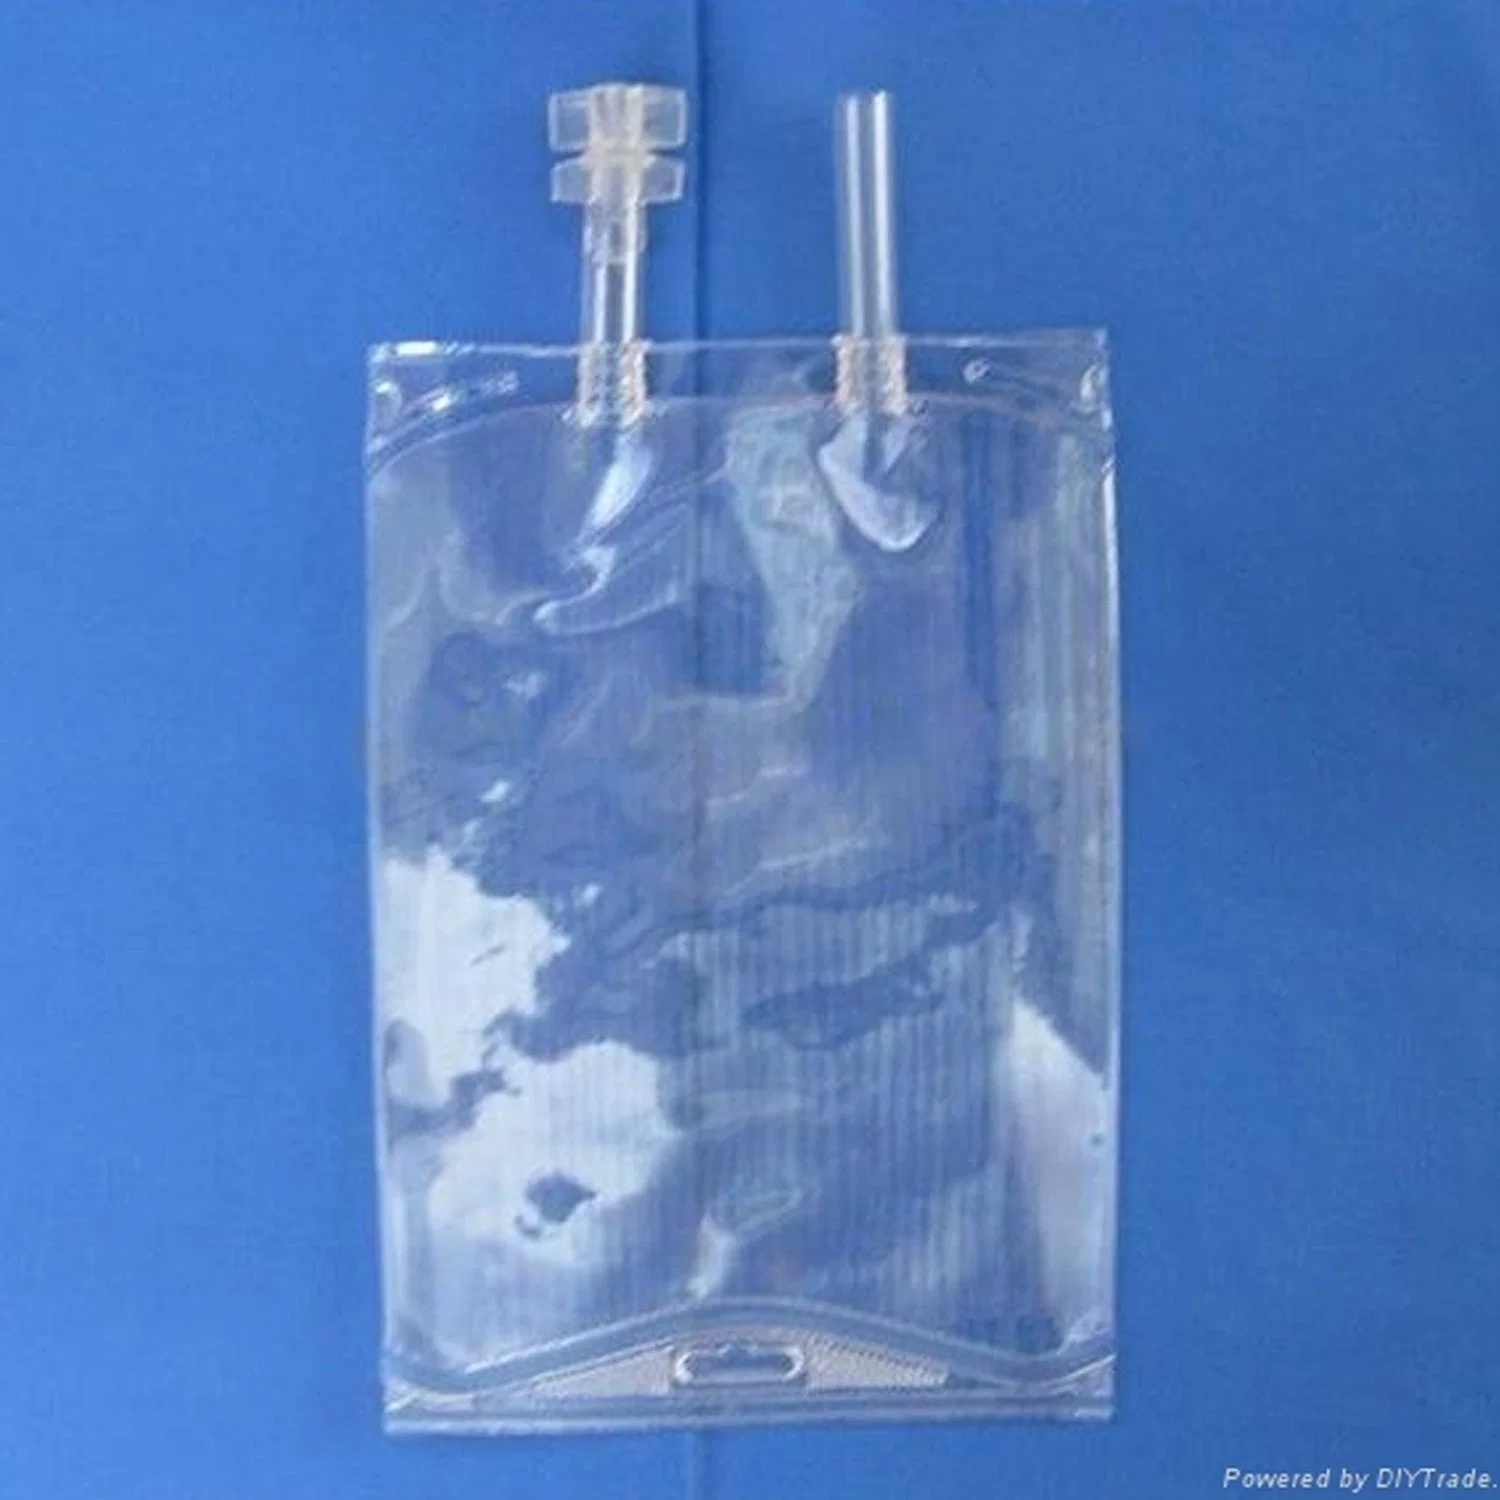 Siny Hospital Disposable Sterile Safety Medical Supply Infusion Pump Bag with Cheap Price